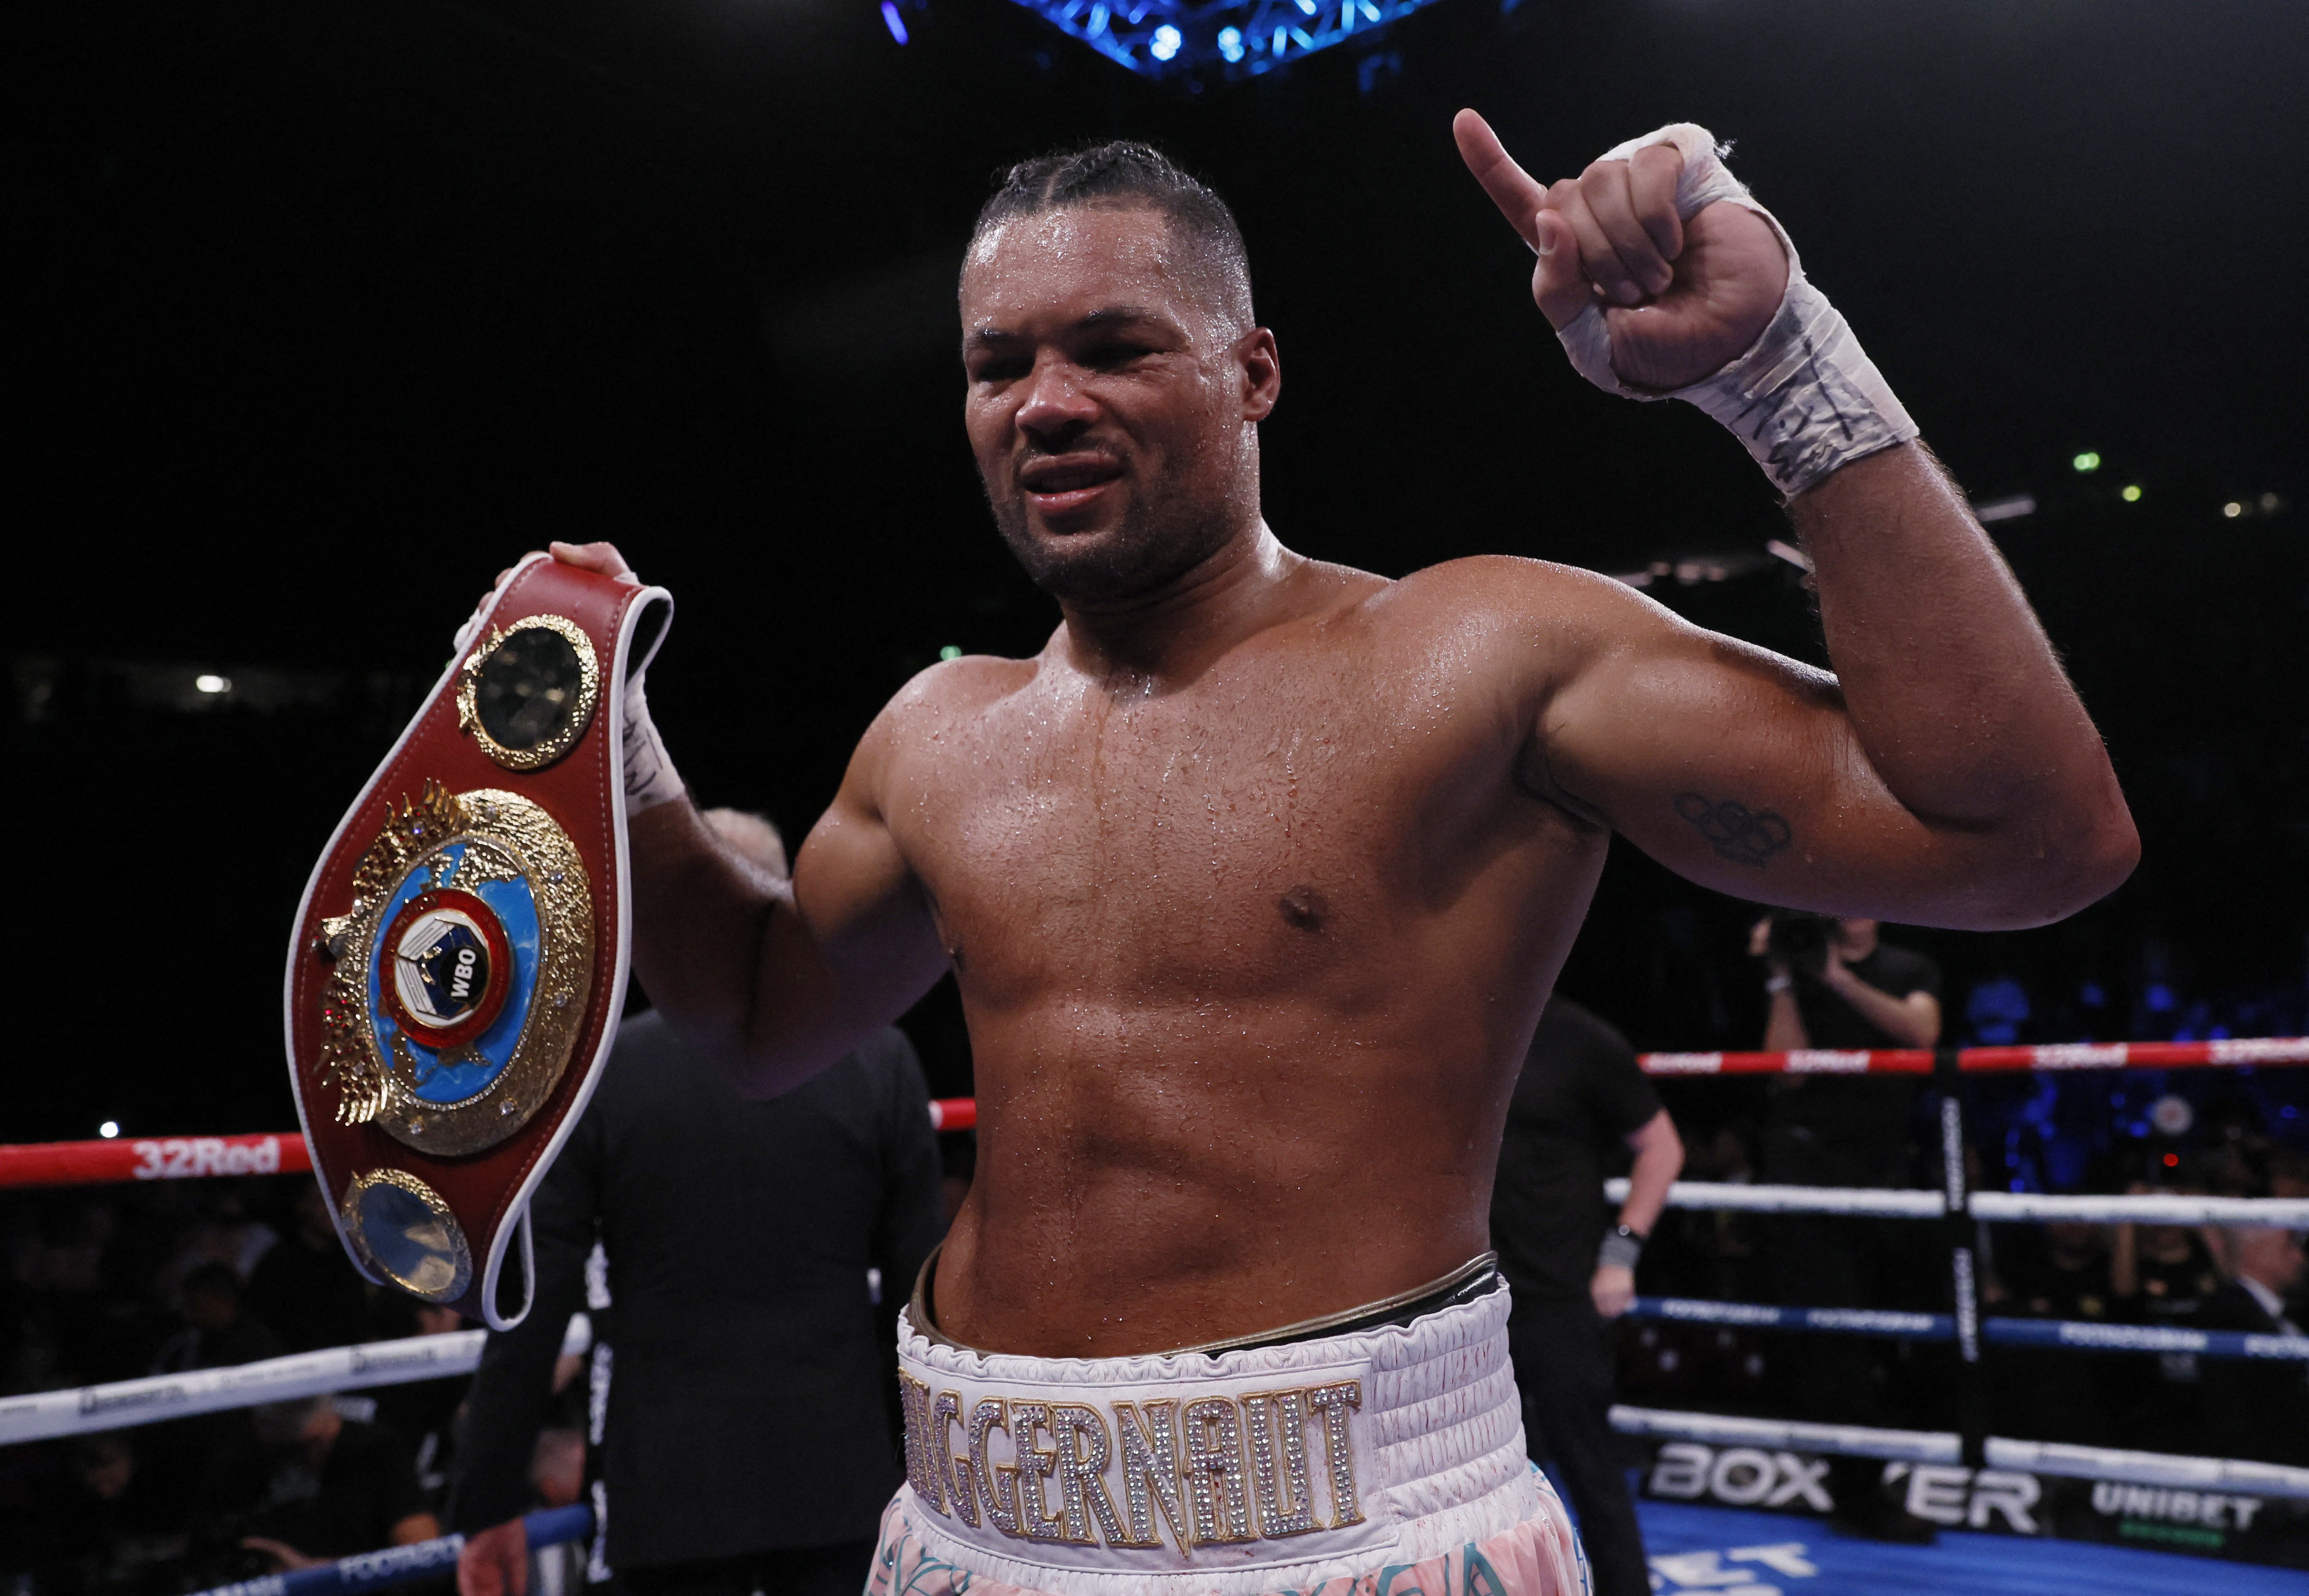 , Joe Joyce loved cheerleading and springboard diving before becoming fearsome heavyweight boxer